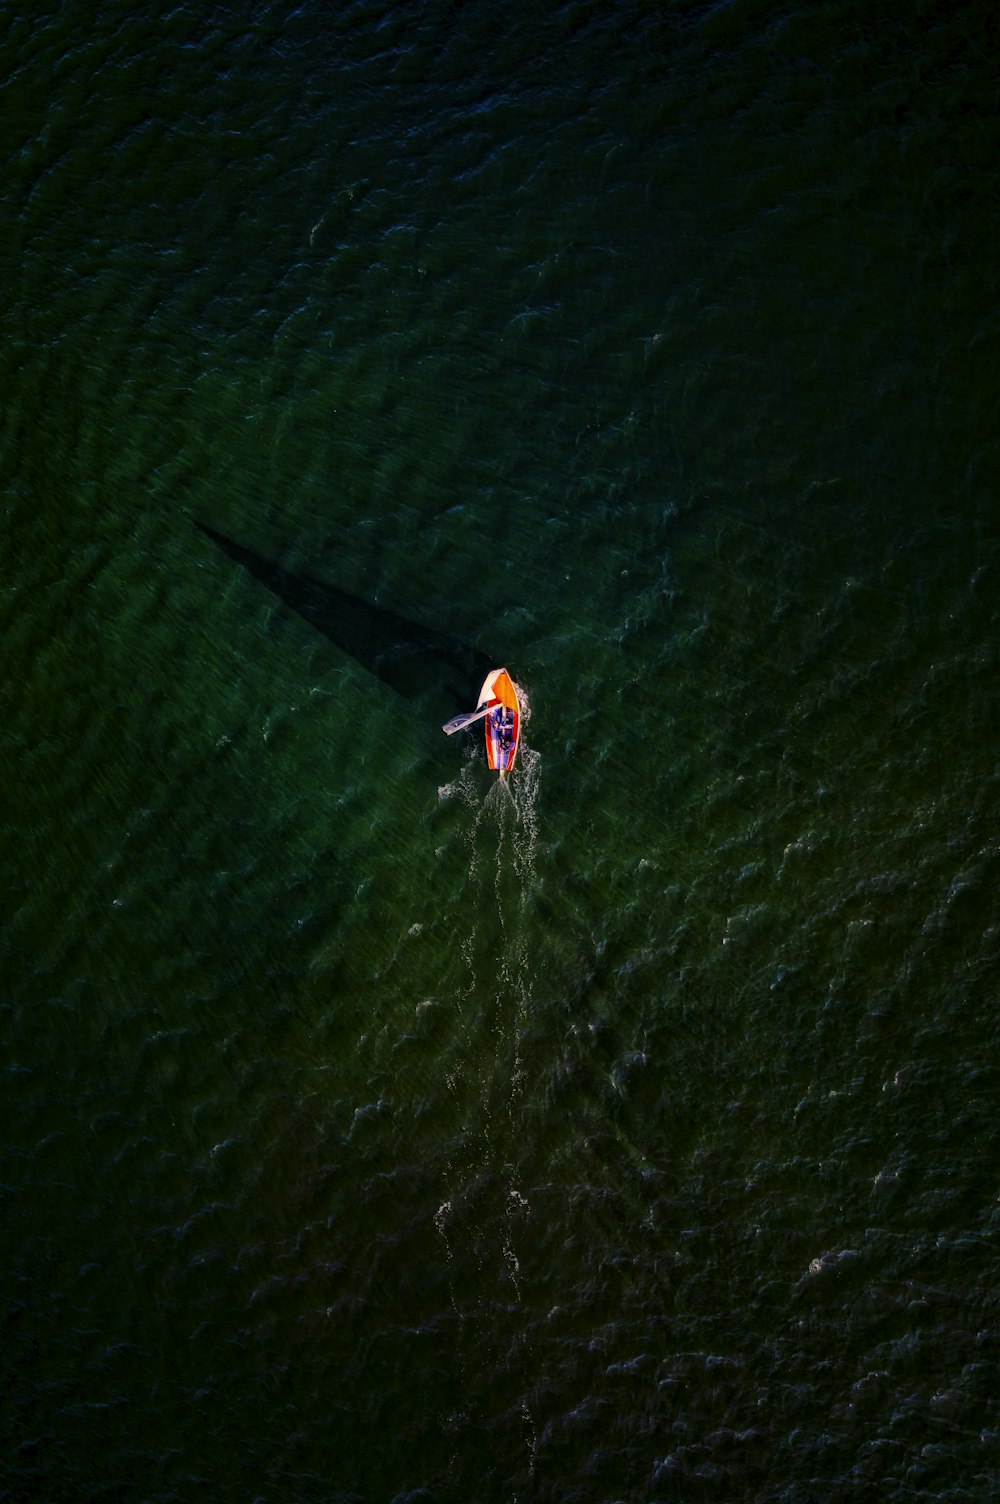 a person in a boat on a body of water